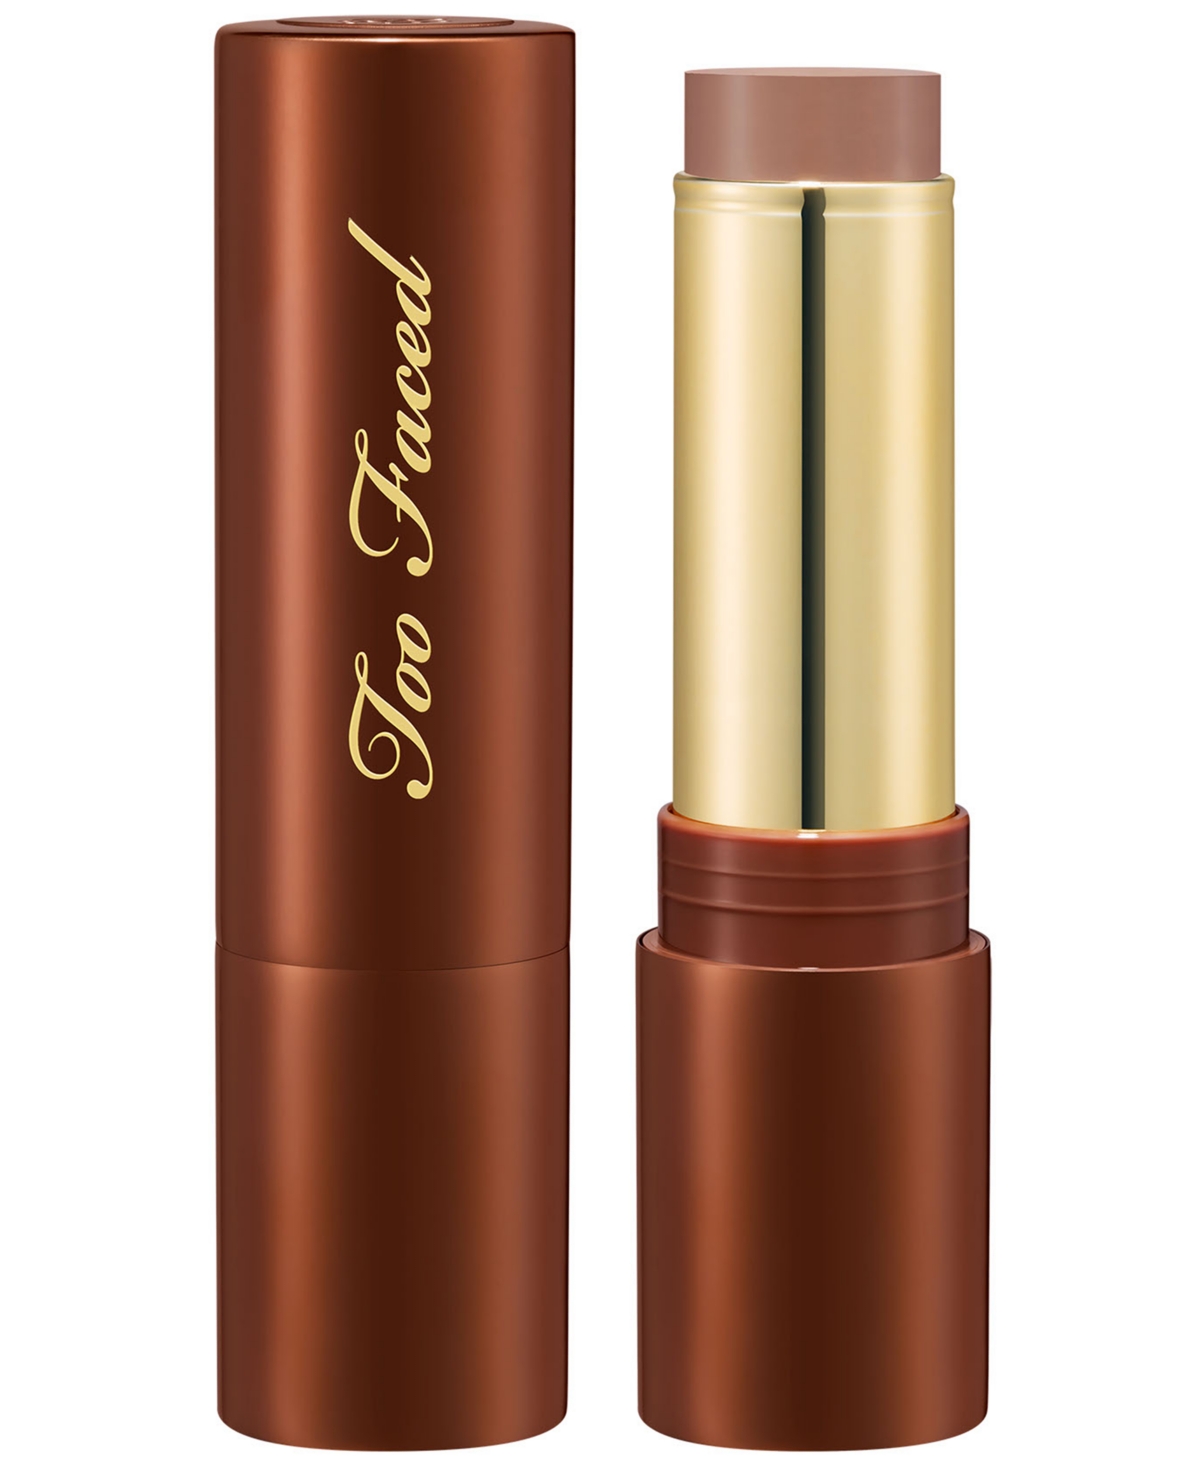 Too Faced Chocolate Soleil Melting Bronzing & Sculpting Stick In Chocolate Mousse